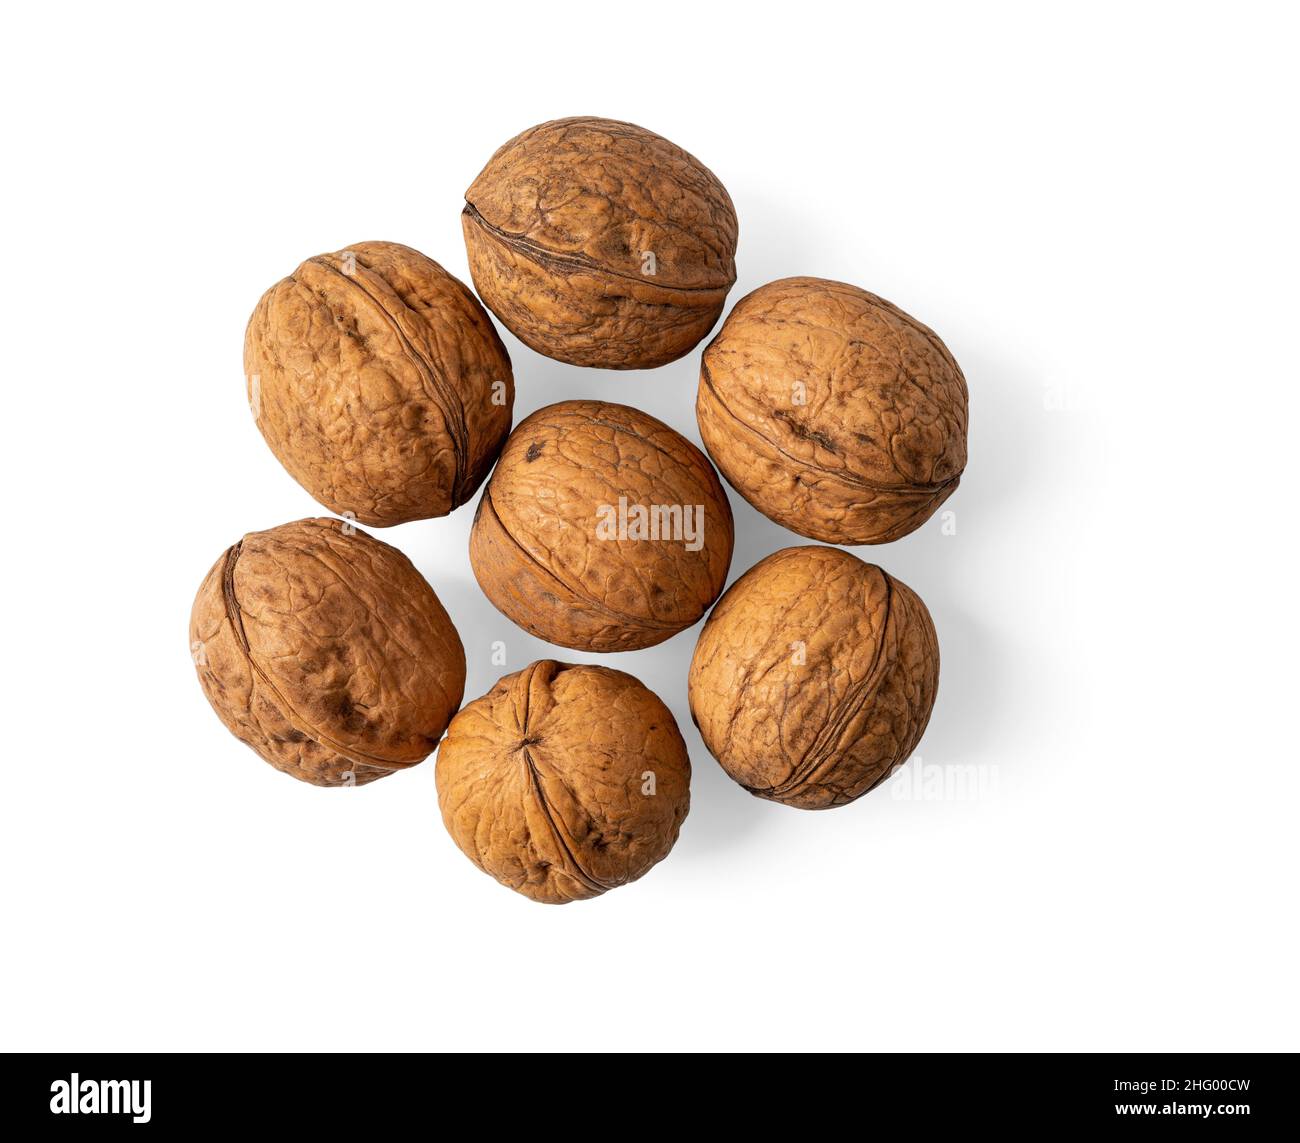 Unshelled walnuts heap isolated on a white background. Juglans regia tree fresh tasty fruits macro. Whole nuts in their shells cutout. Vegetarian food Stock Photo